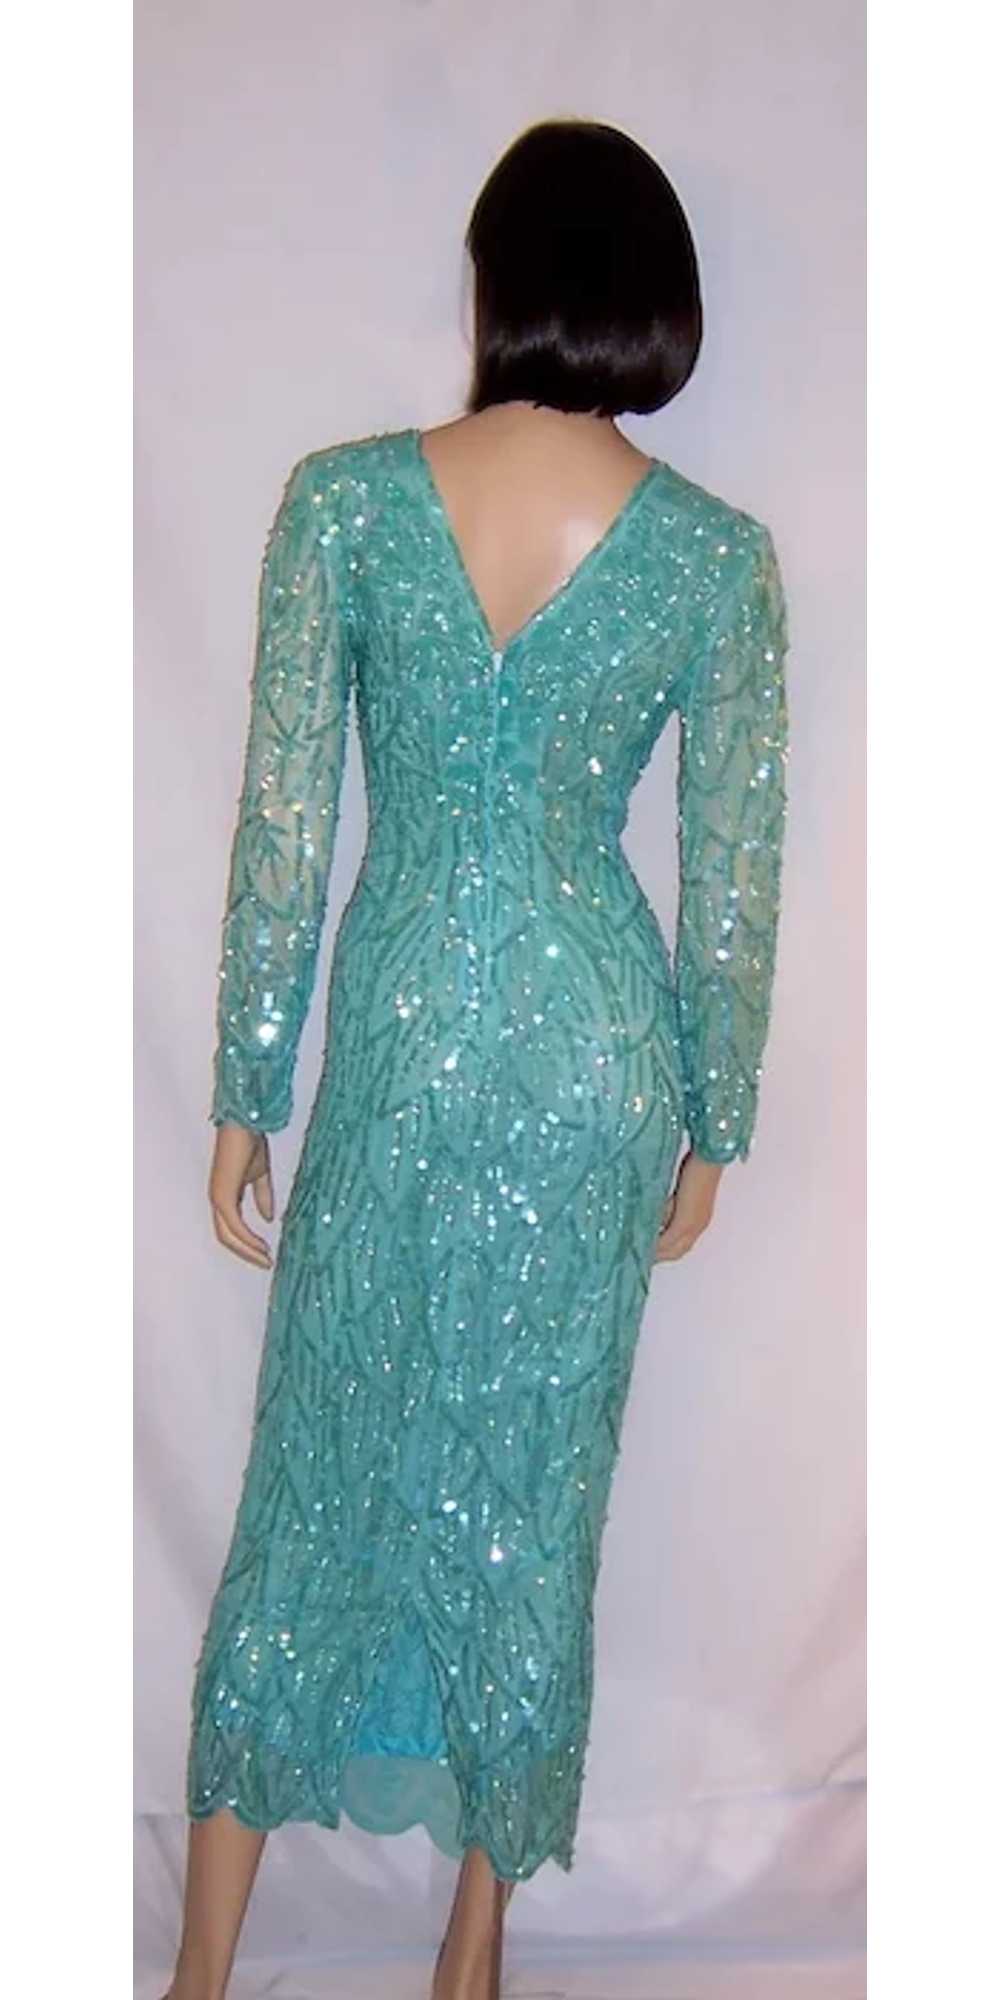 Pale Turquoise Sequined and Beaded Gown - image 3